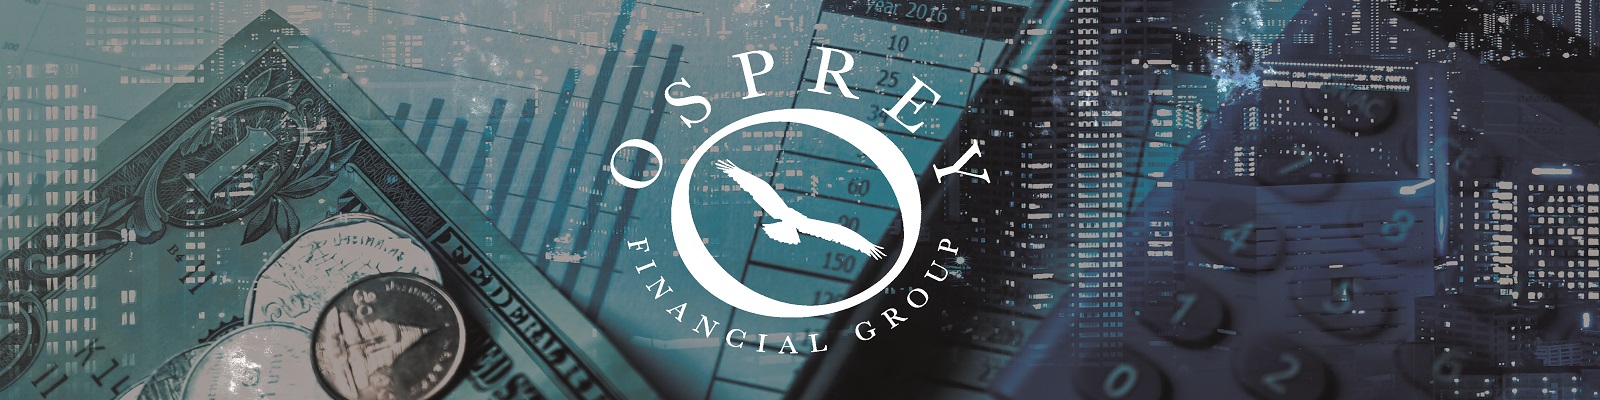 Osprey Financial Group around a circle with a bird silhouette and buildings money and calculator